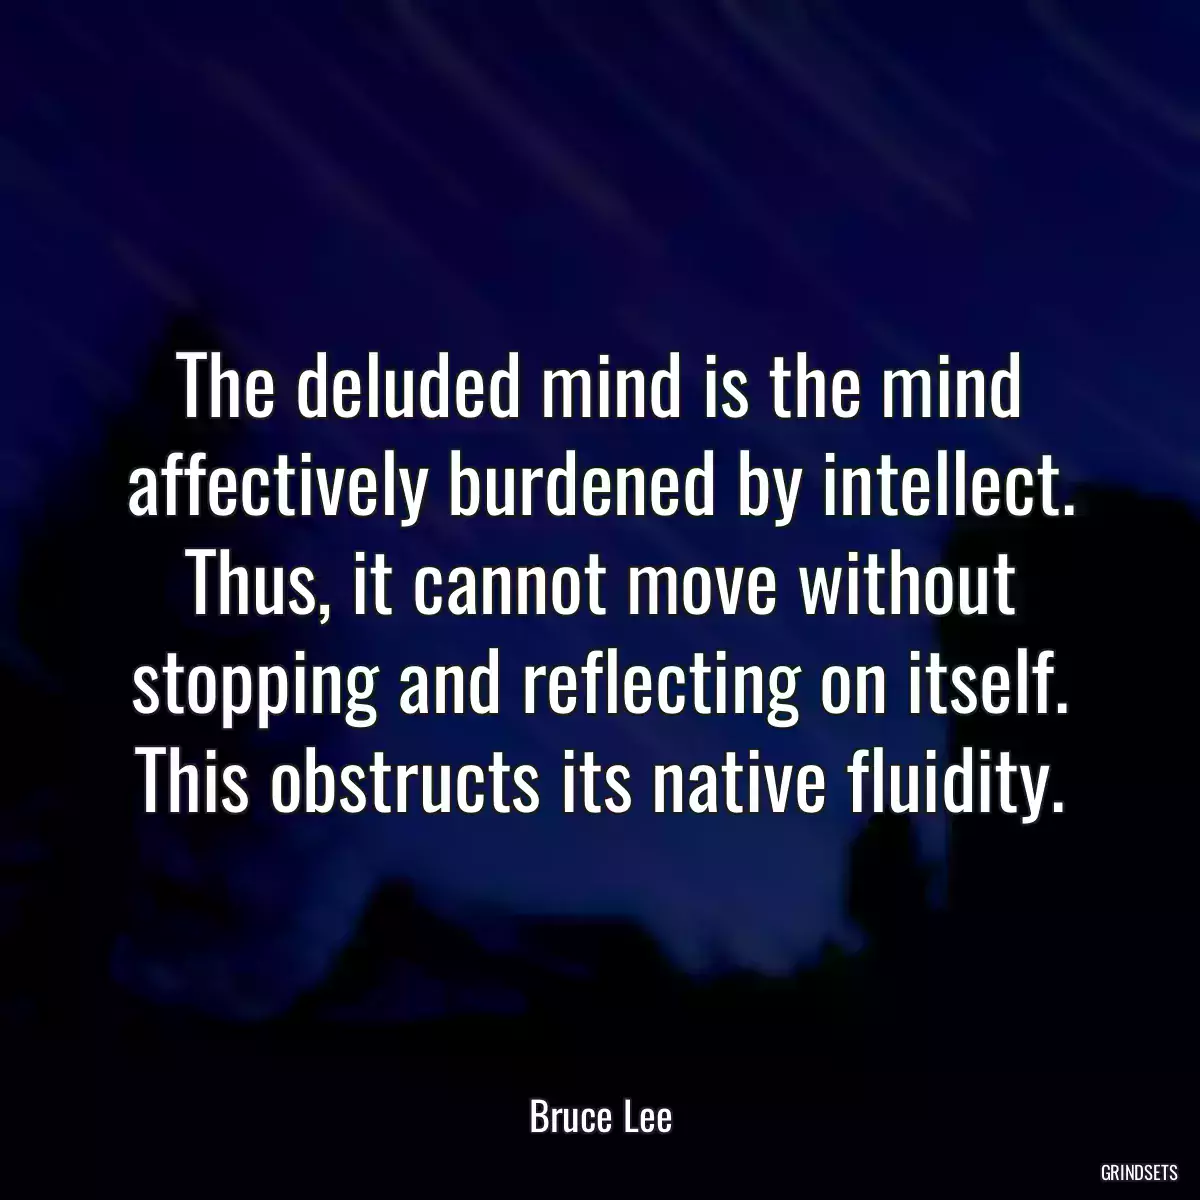 The deluded mind is the mind affectively burdened by intellect. Thus, it cannot move without stopping and reflecting on itself. This obstructs its native fluidity.